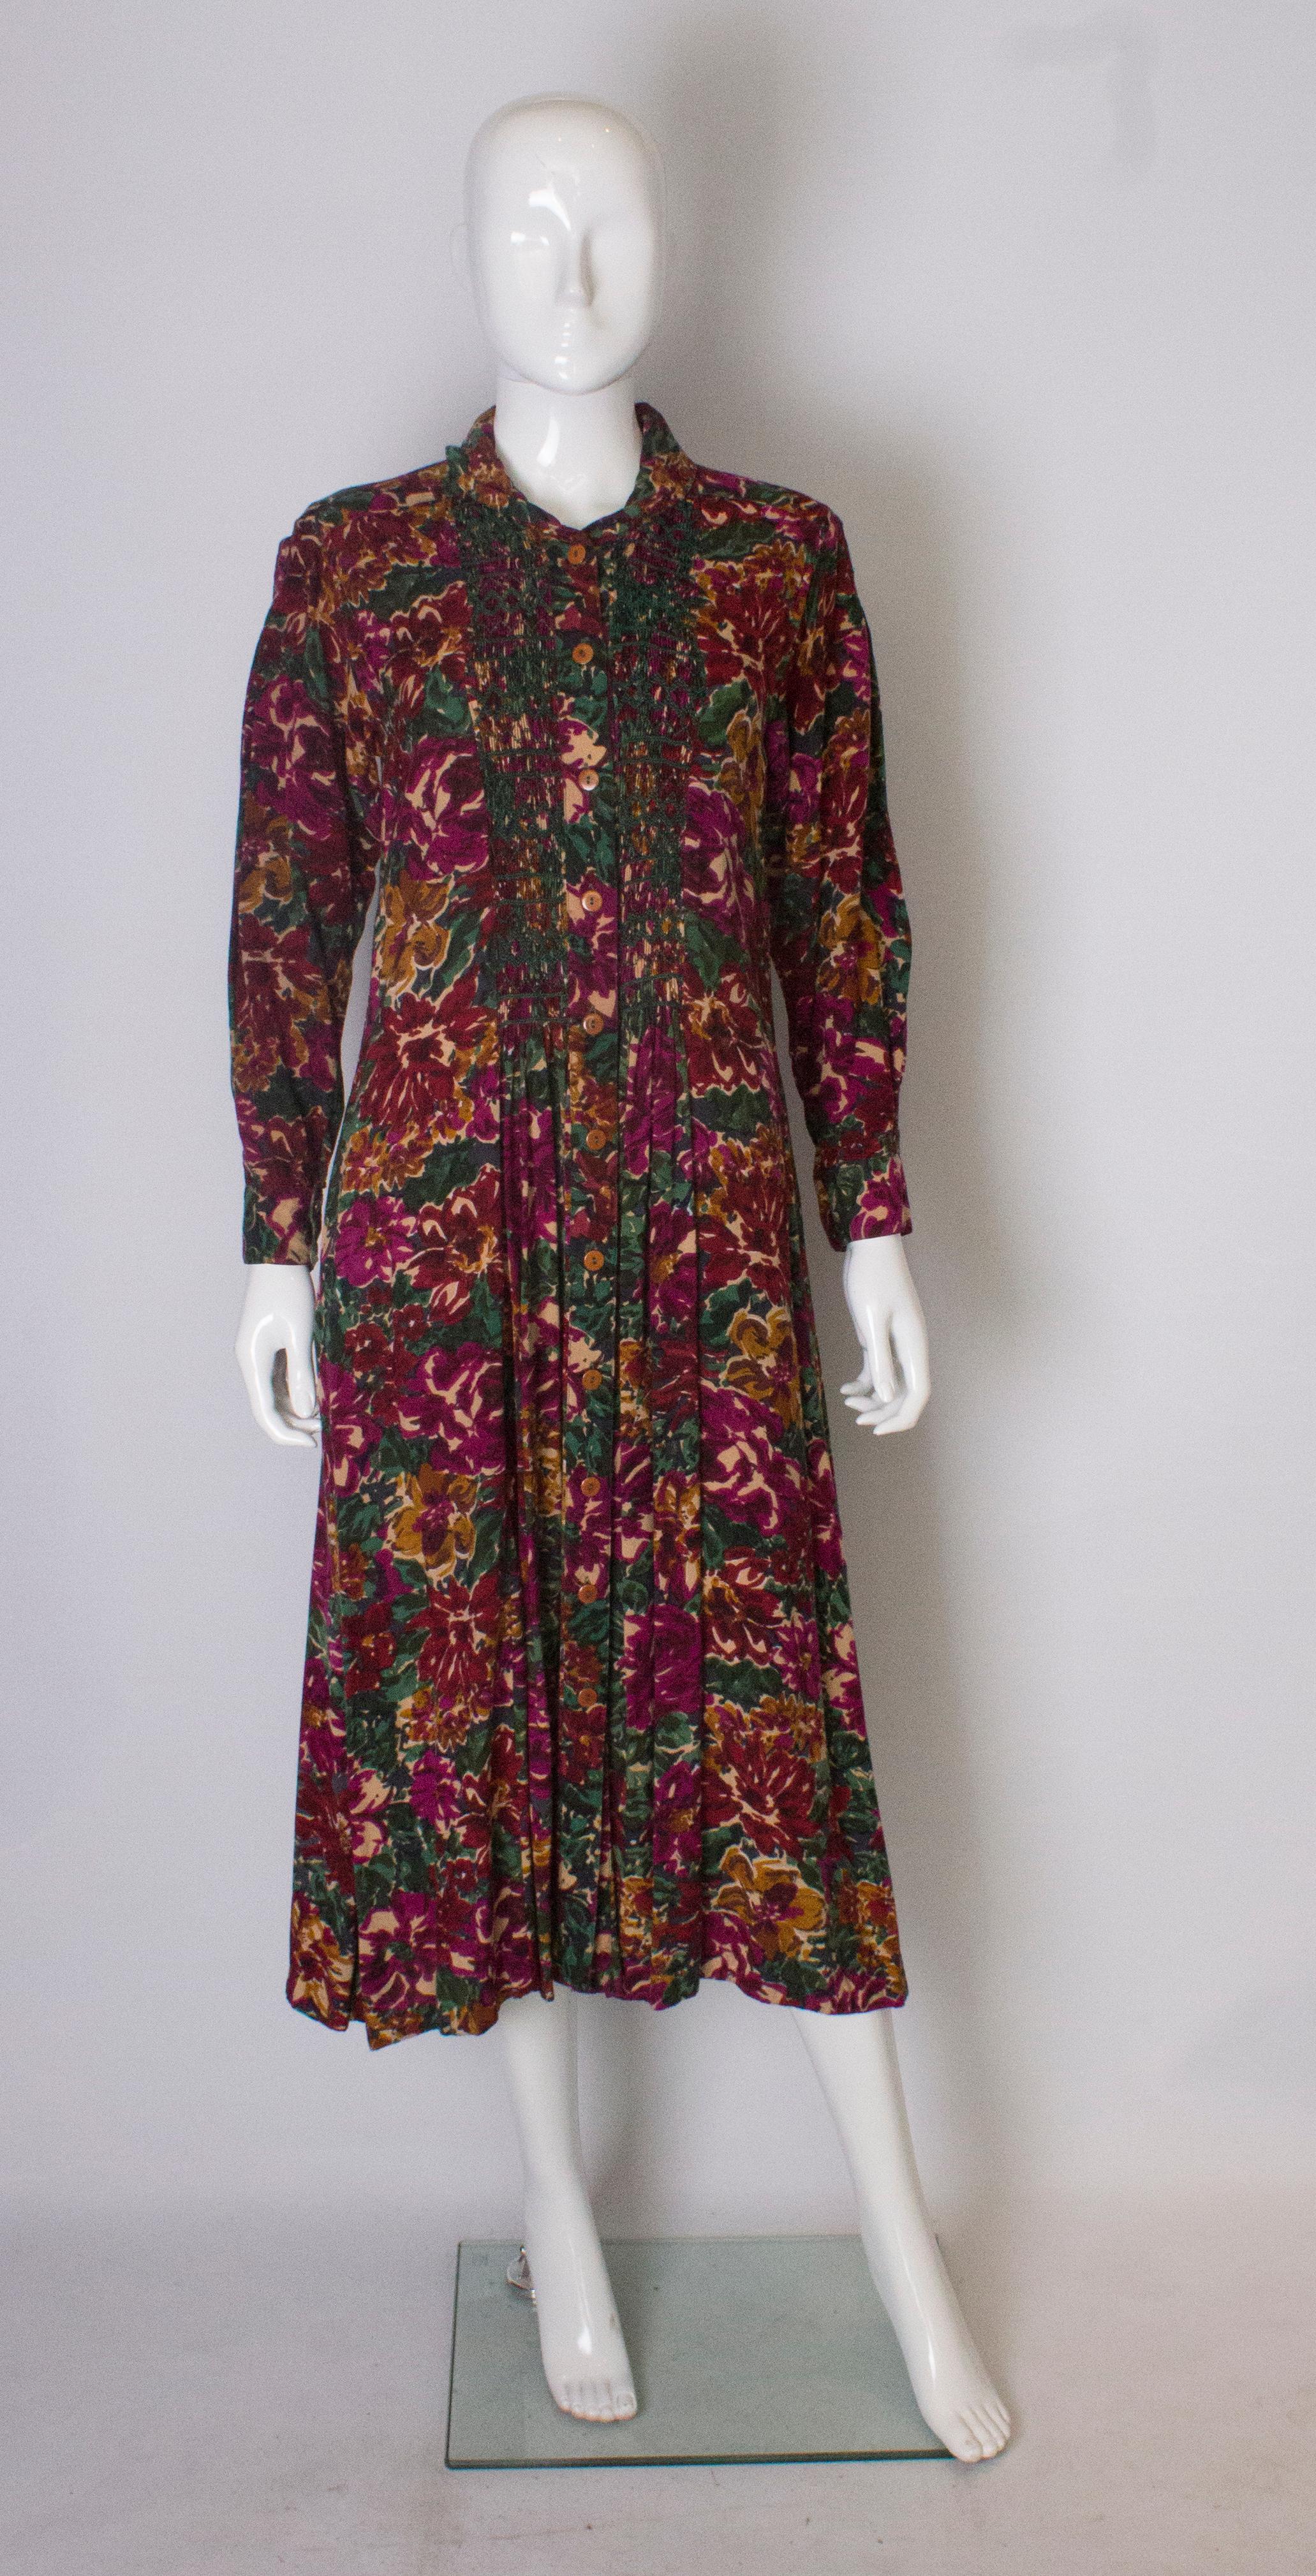 A great vintage dress by Monsoon.The dress is in a wonderful print of  burgundy, green ,brown and biscuit, and has wonderful green smocking detail on the front, back and sleeves. It has a button front opening,  an interesting shaped collar, and a